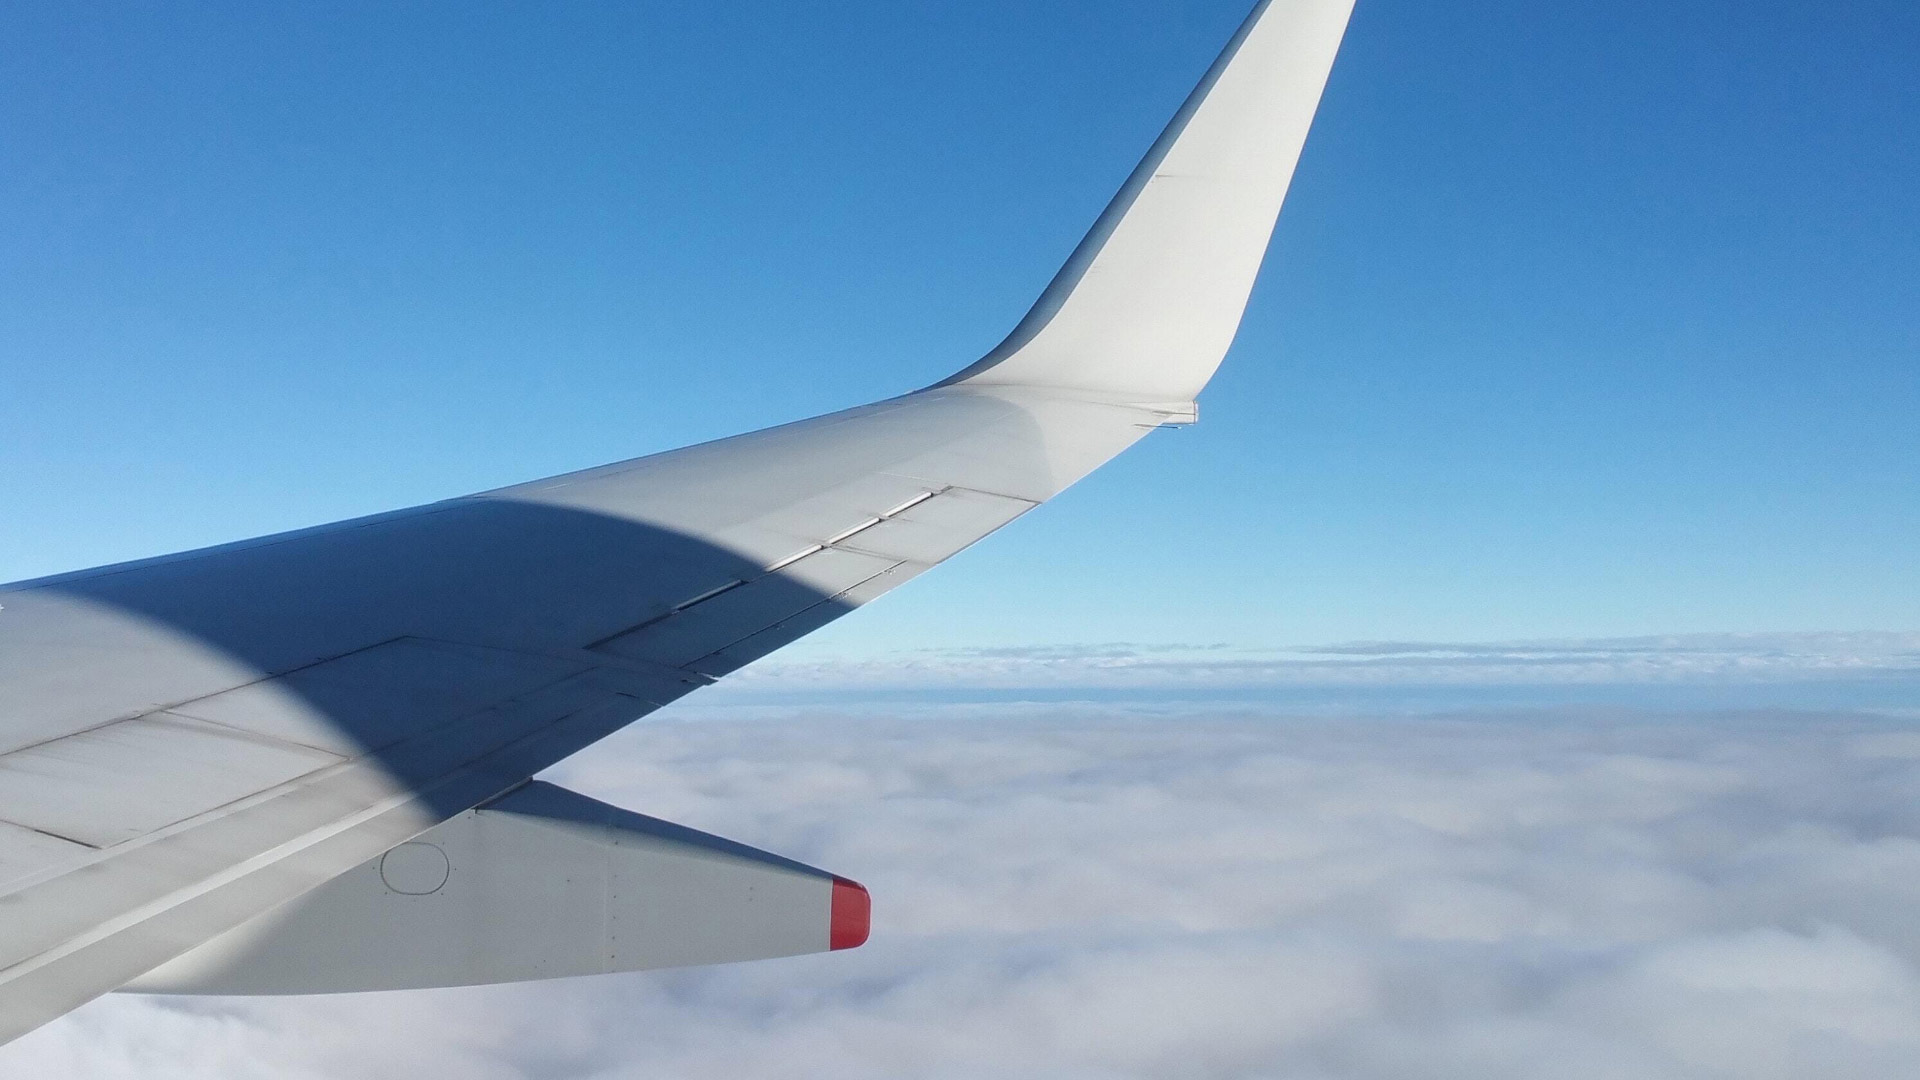 The wing of a private jet above the clouds against a blue sky.